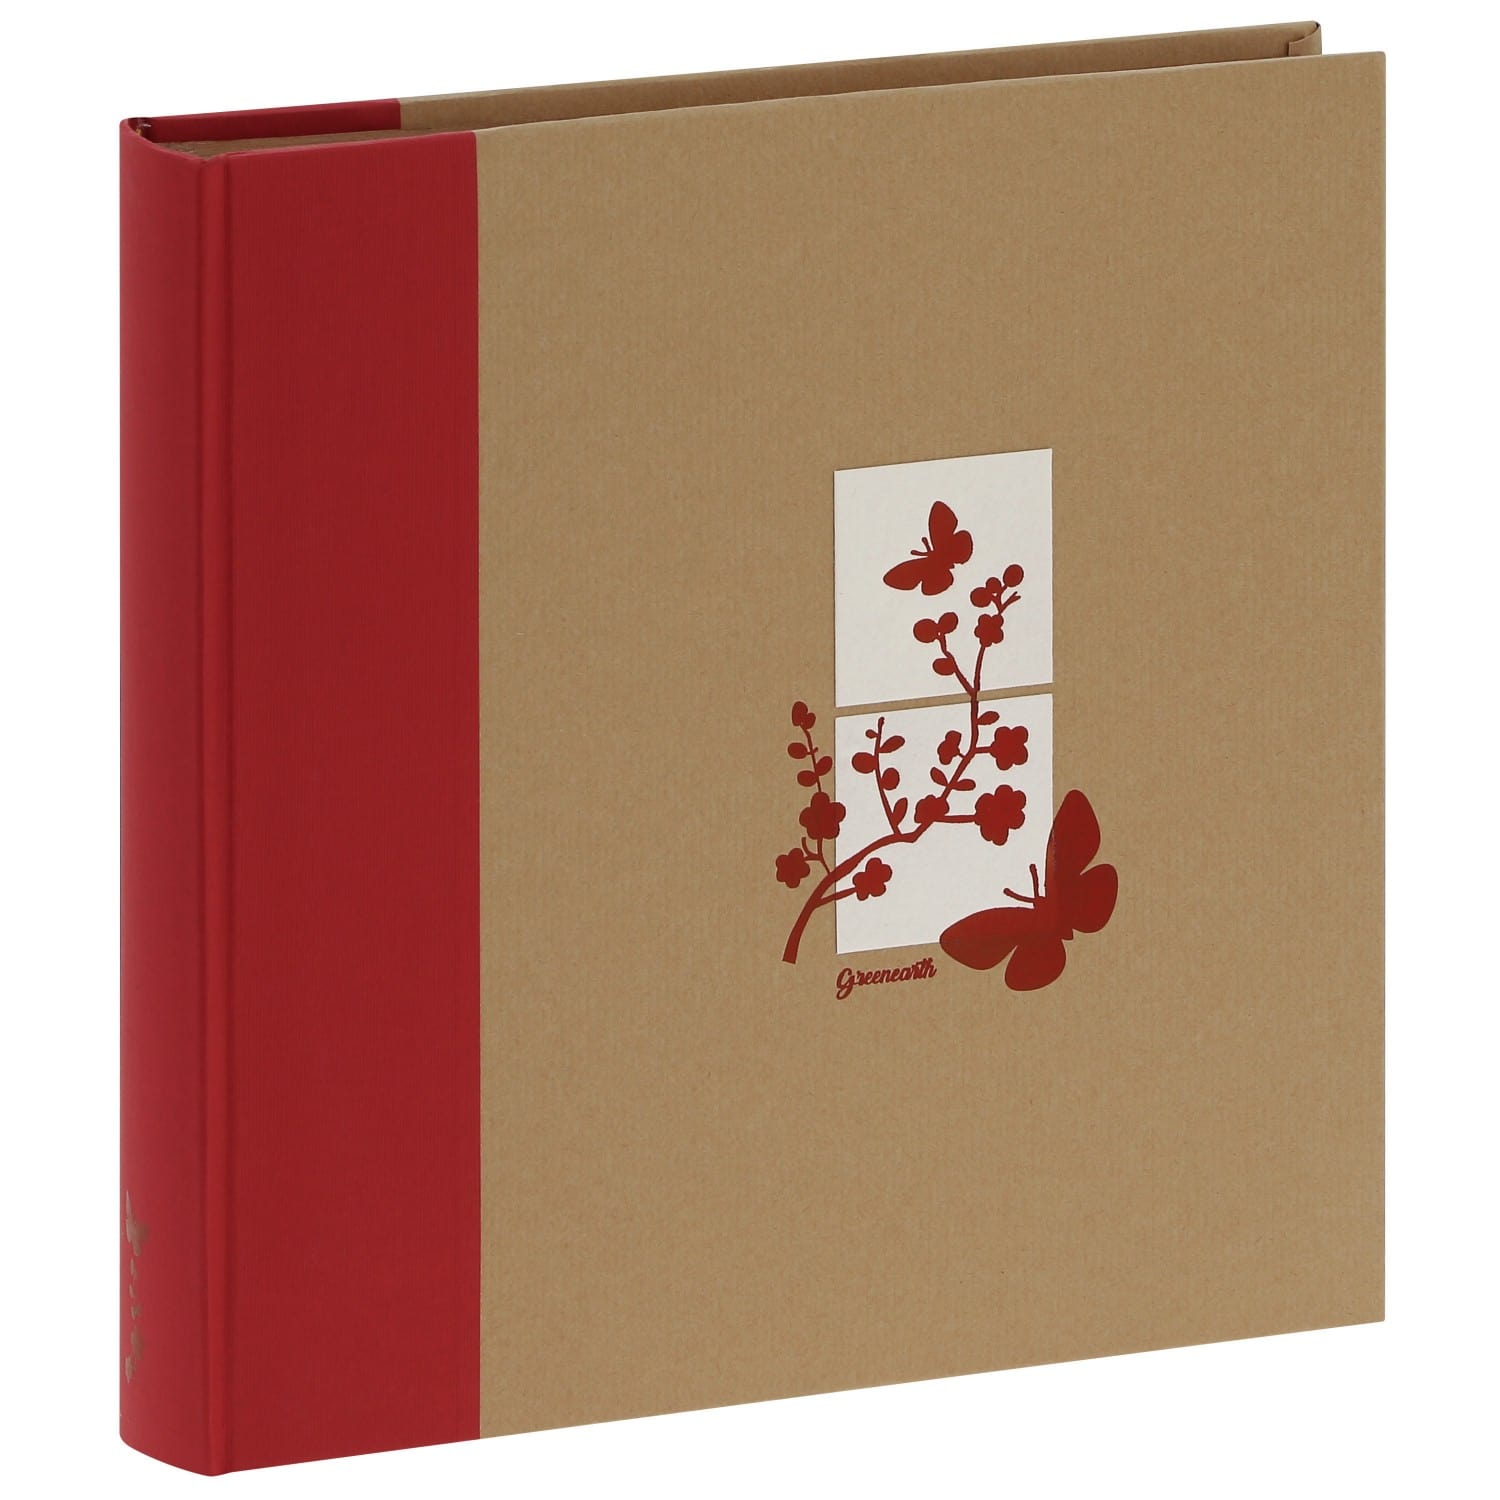 https://www.mbtech.fr/25531-thickbox_default/album-photo-panodia-serie-greenearth-5-30x30cm-400-photos-10x15-traditionnel-100-pages-kraft-rouge.jpg